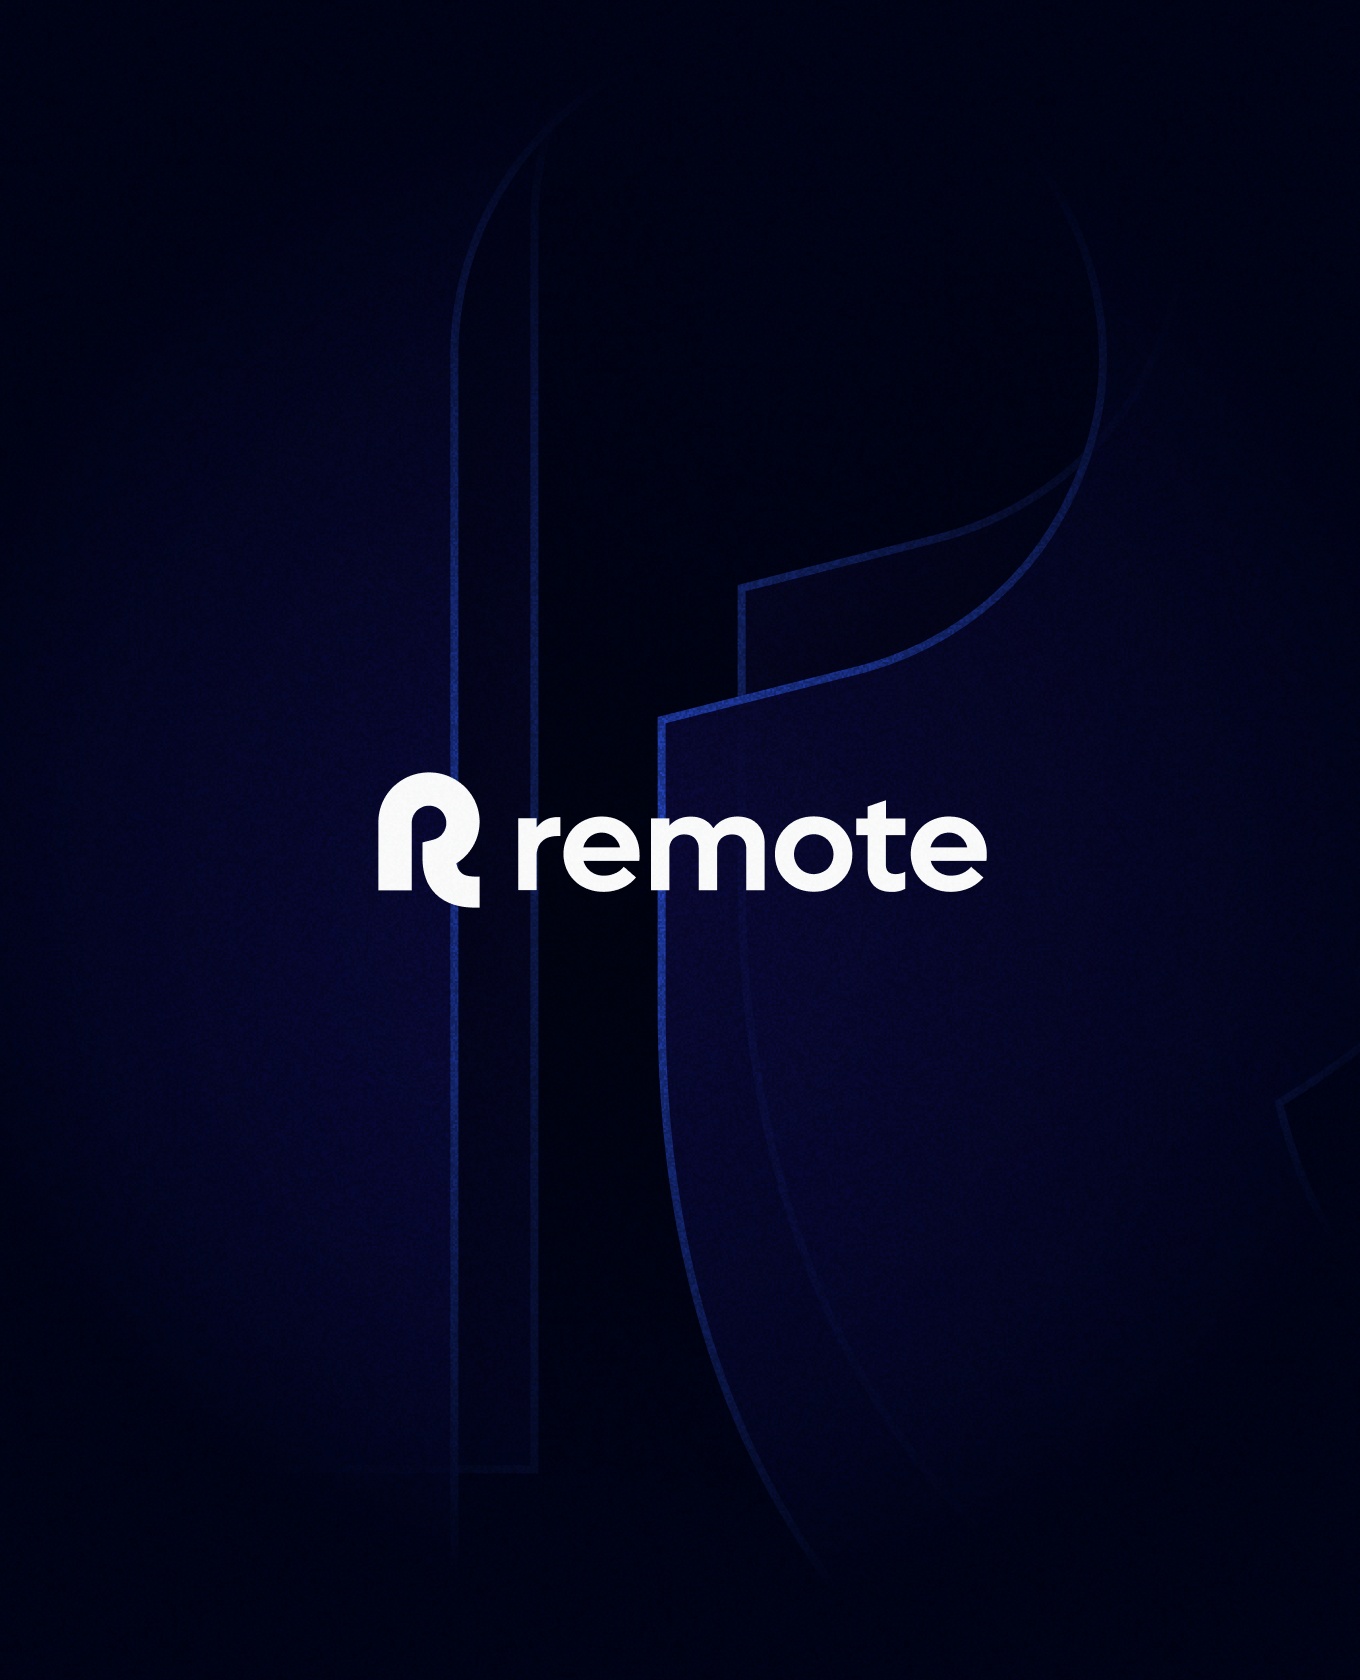 The Remote wordmark against a dark but vibrant blue background composed of abstract and expanded shapes from the wordmark.